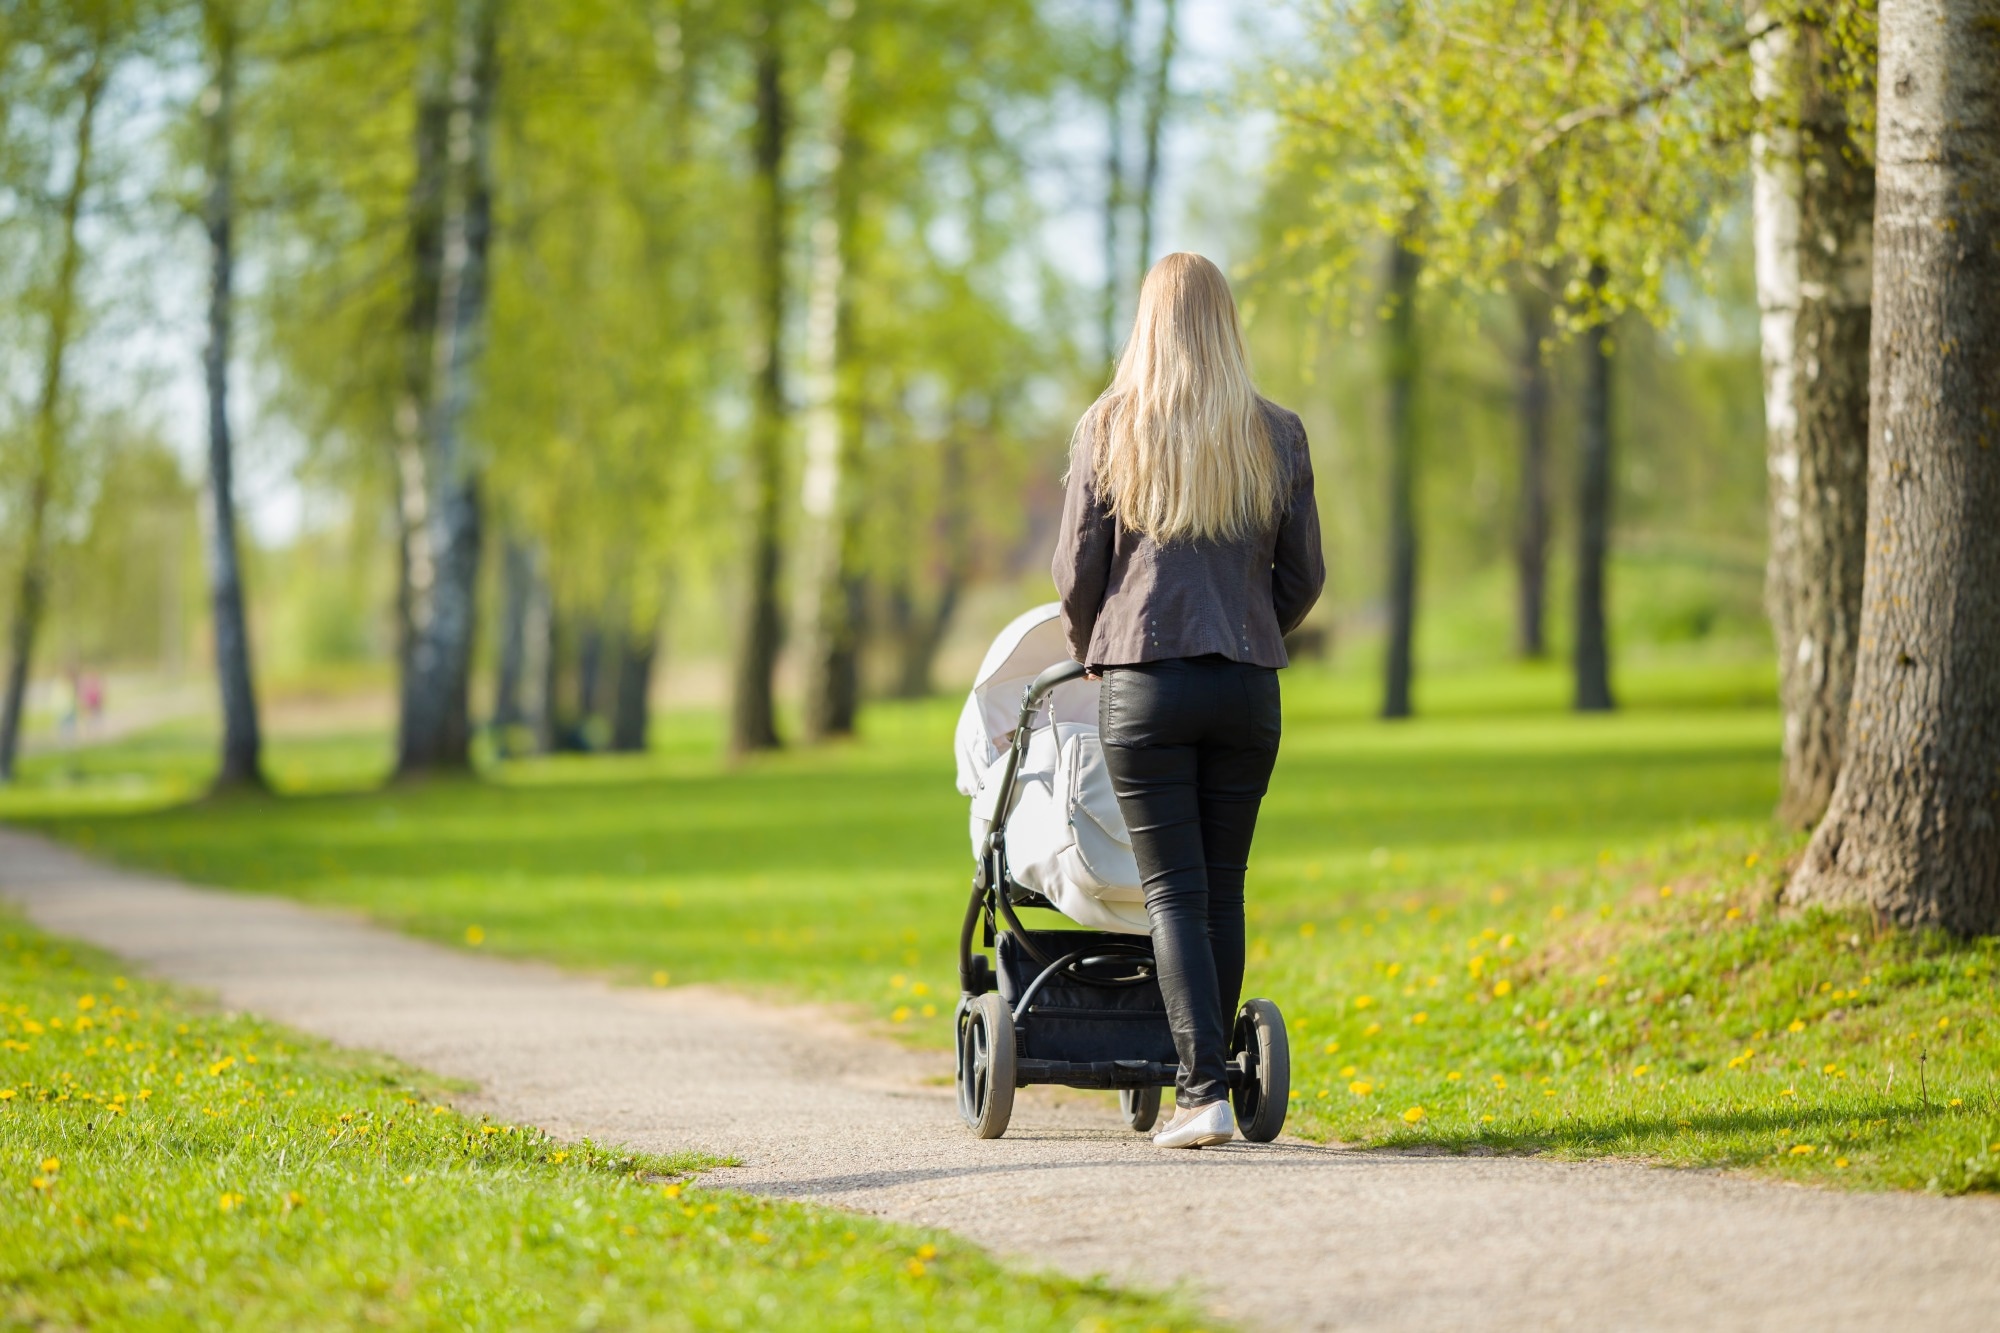 Study: Association between urban green space and postpartum depression, and the role of physical activity: a retrospective cohort study in Southern California. Image Credit: FotoDuets / Shutterstock